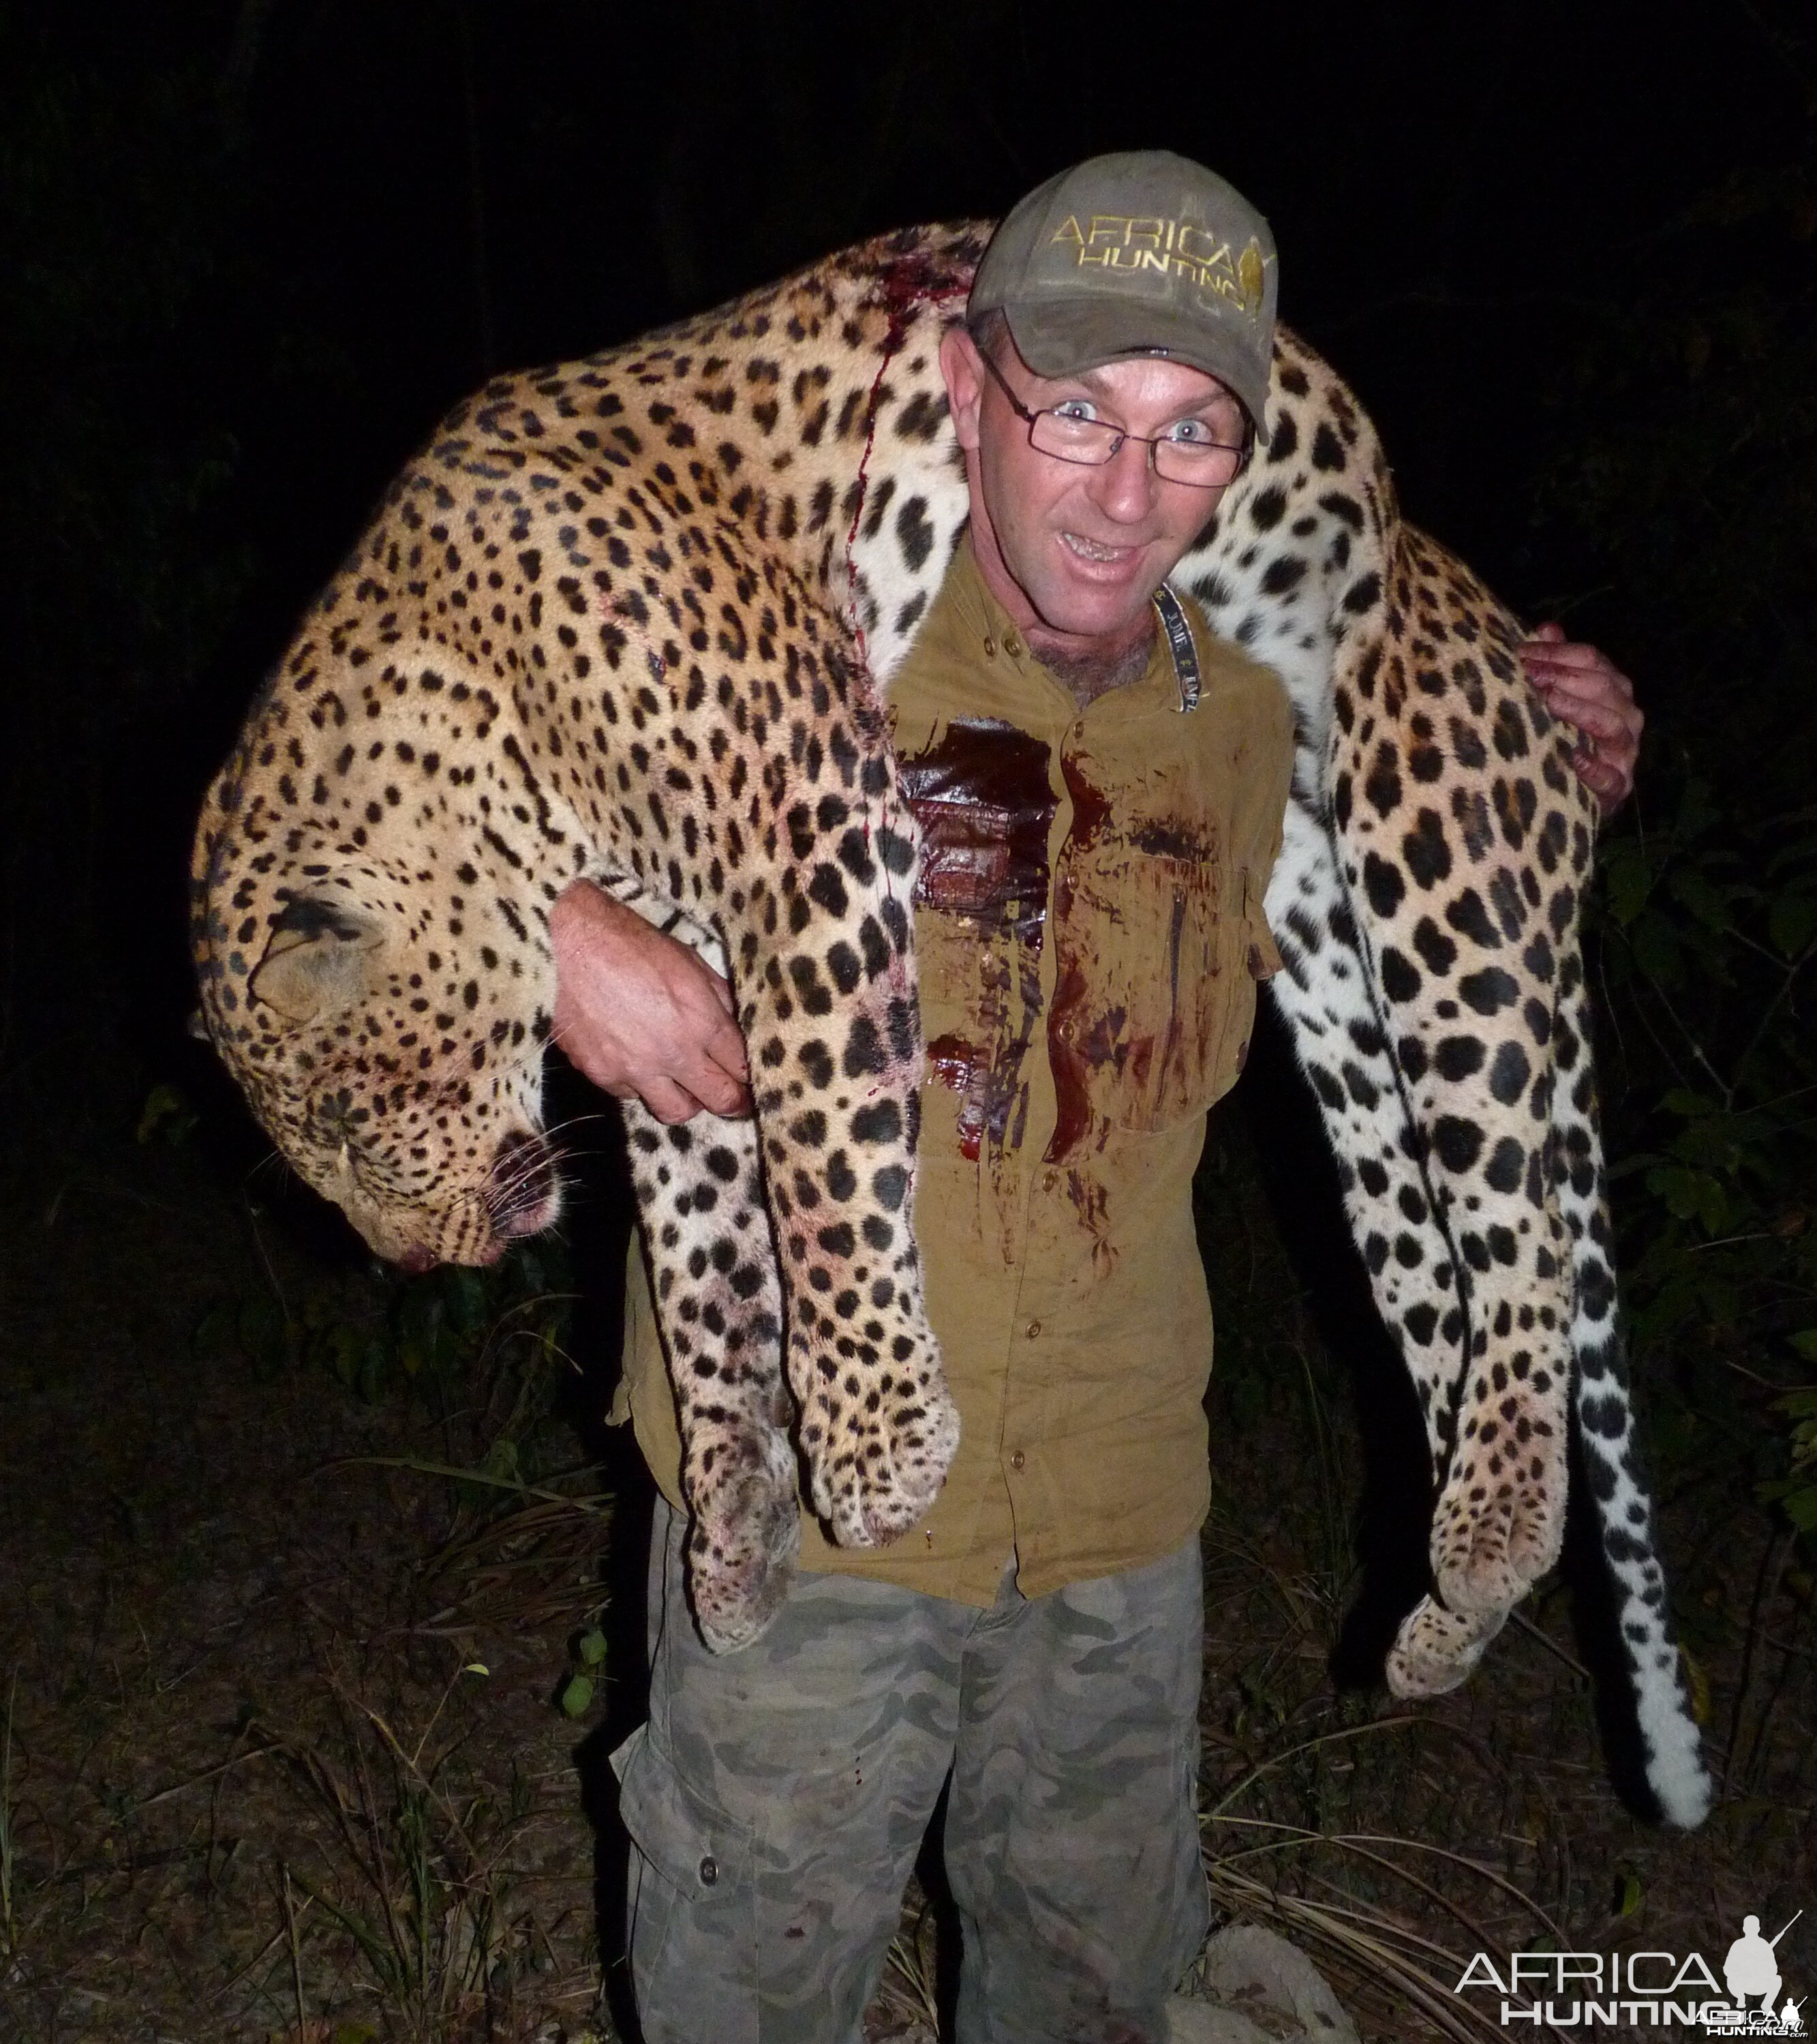 Leopard hunted in Central African Republic